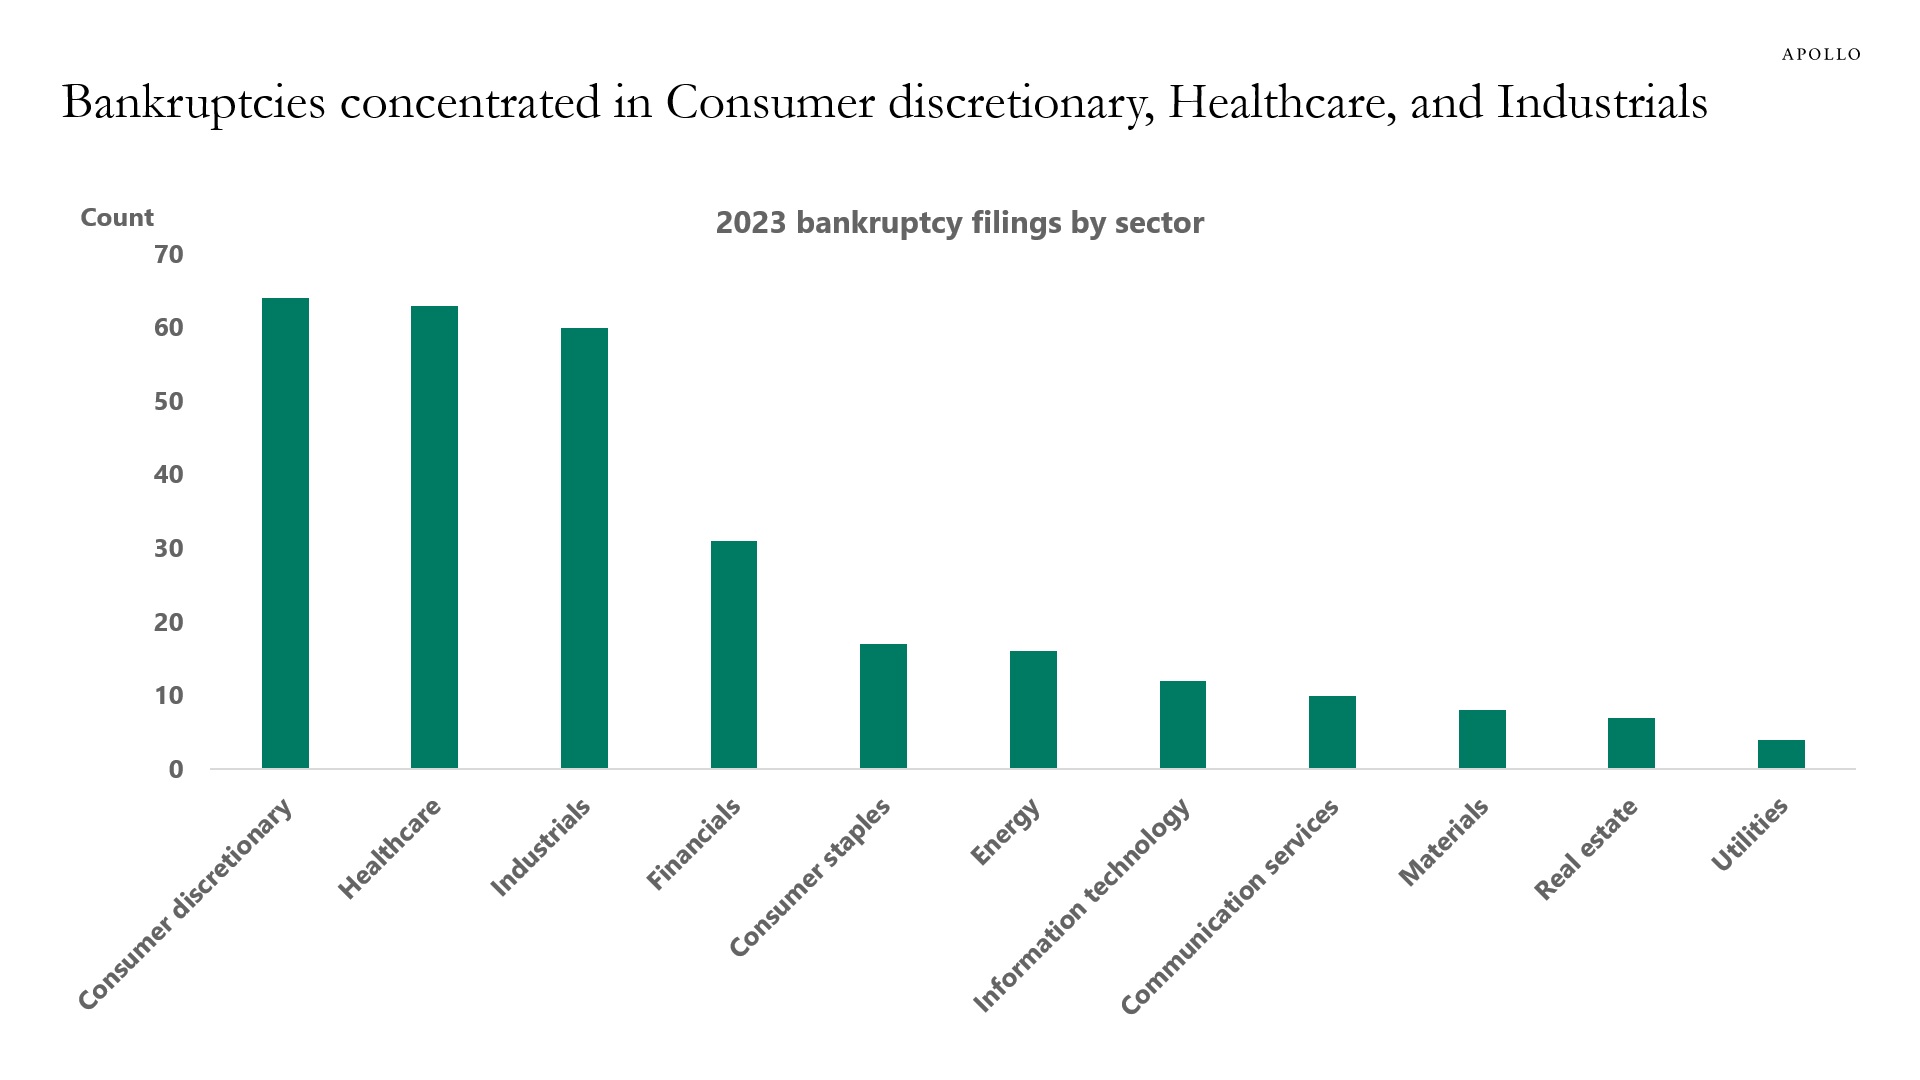 Consumer discretionary, healthcare, and industrials have the most bankruptcies.